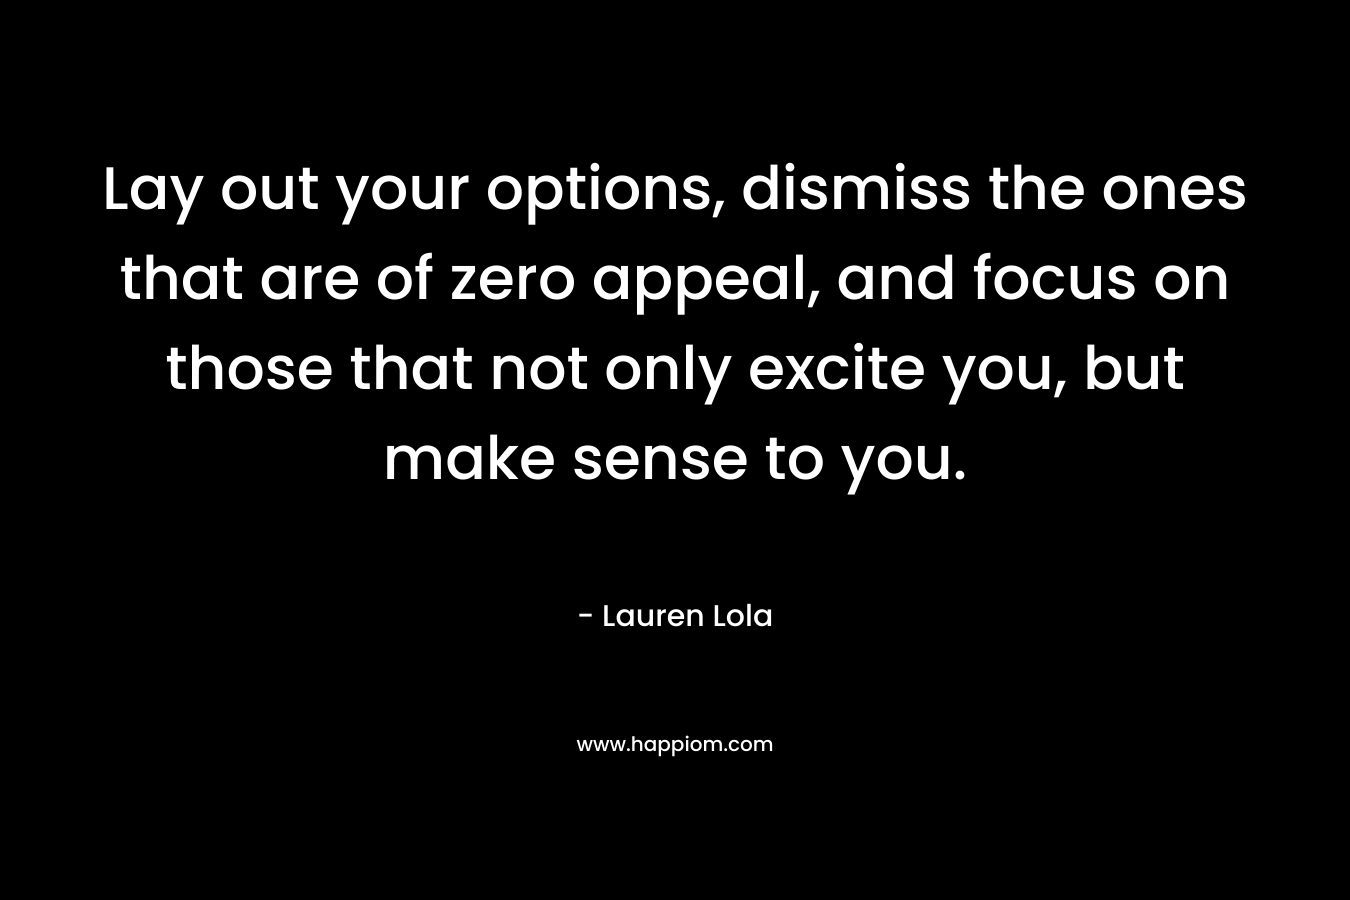 Lay out your options, dismiss the ones that are of zero appeal, and focus on those that not only excite you, but make sense to you.